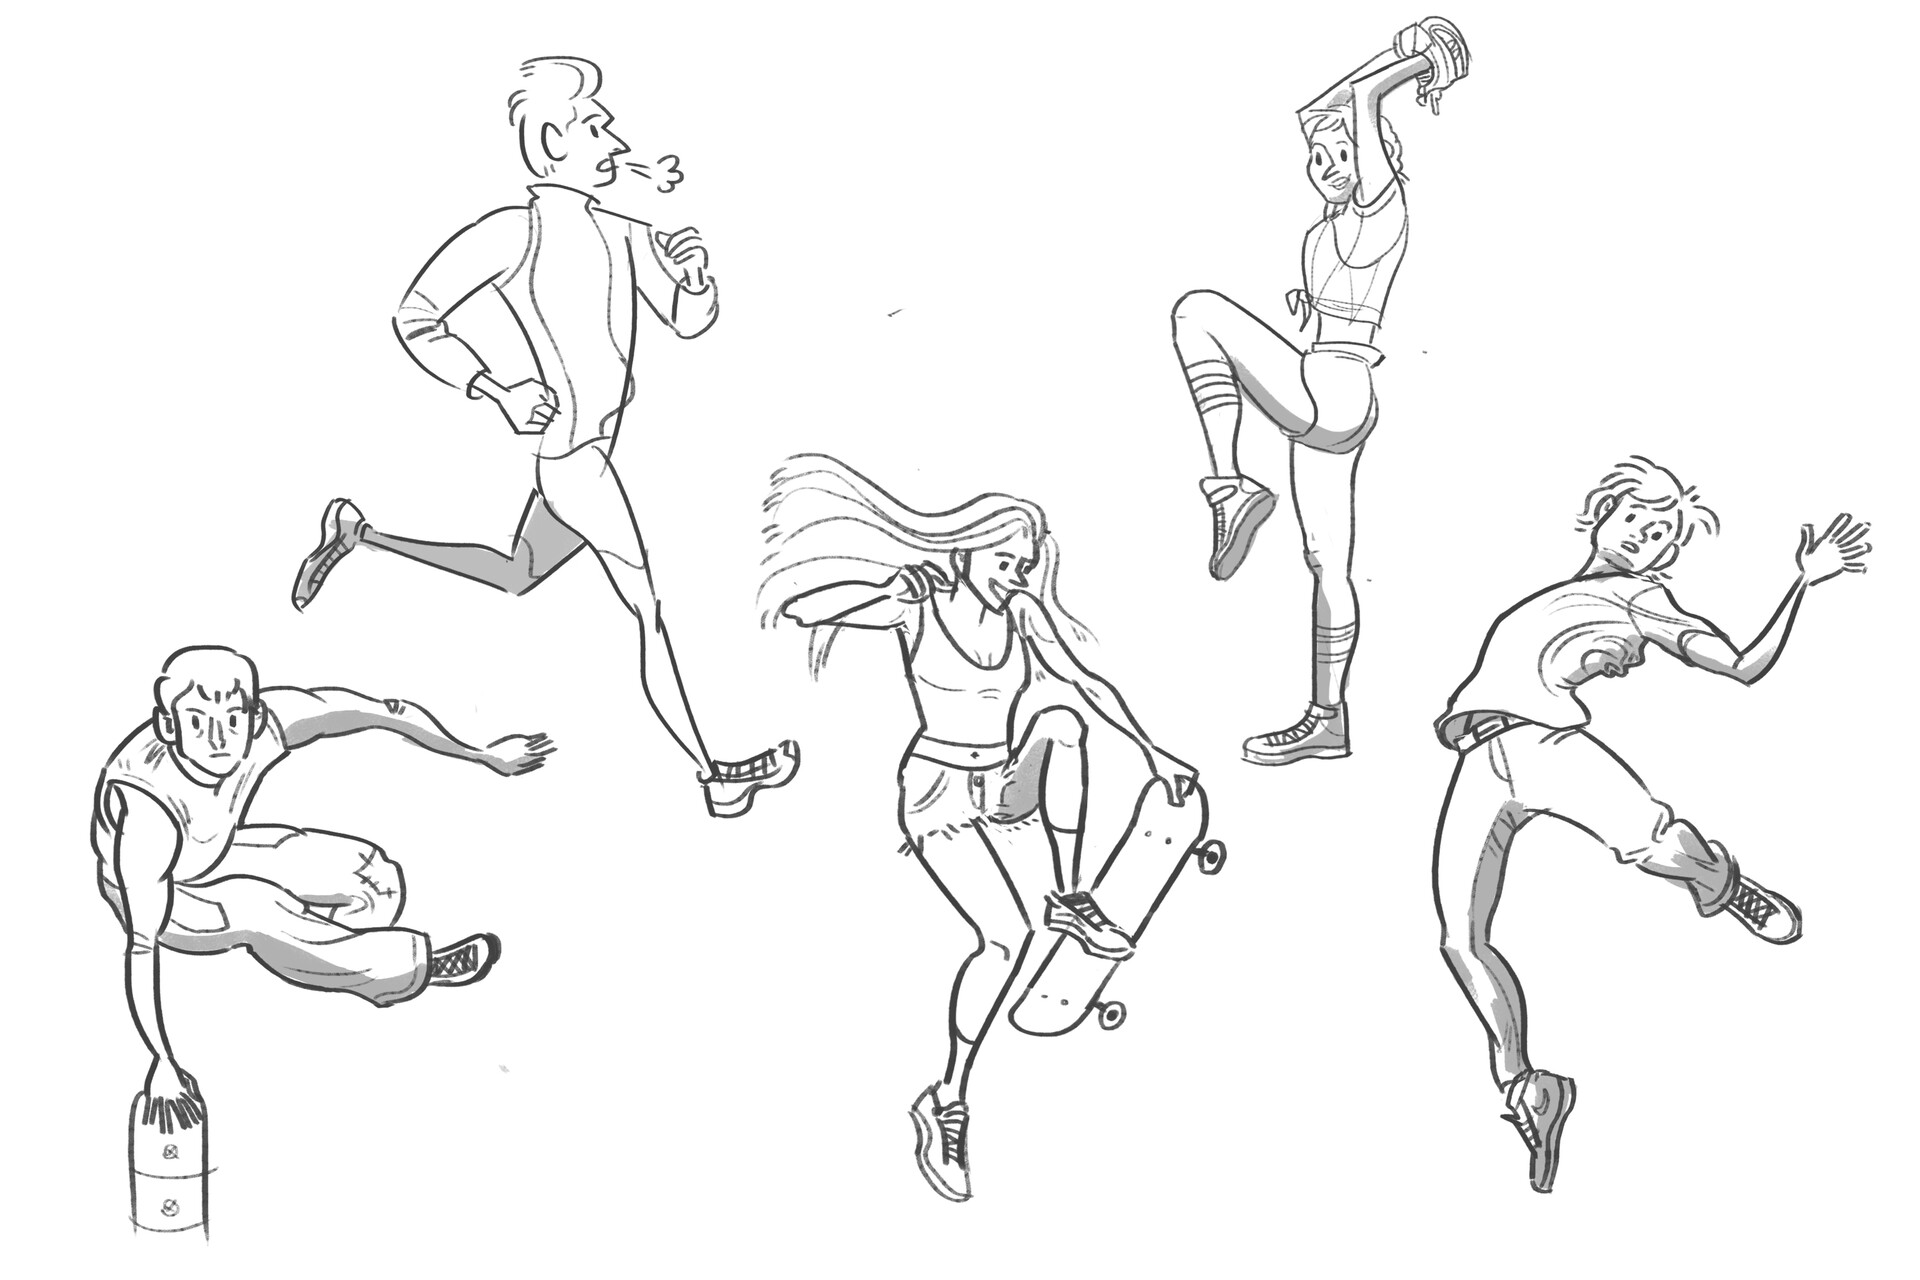 Running Man | Quick drawing of my buddy in a running pose. i… | Flickr